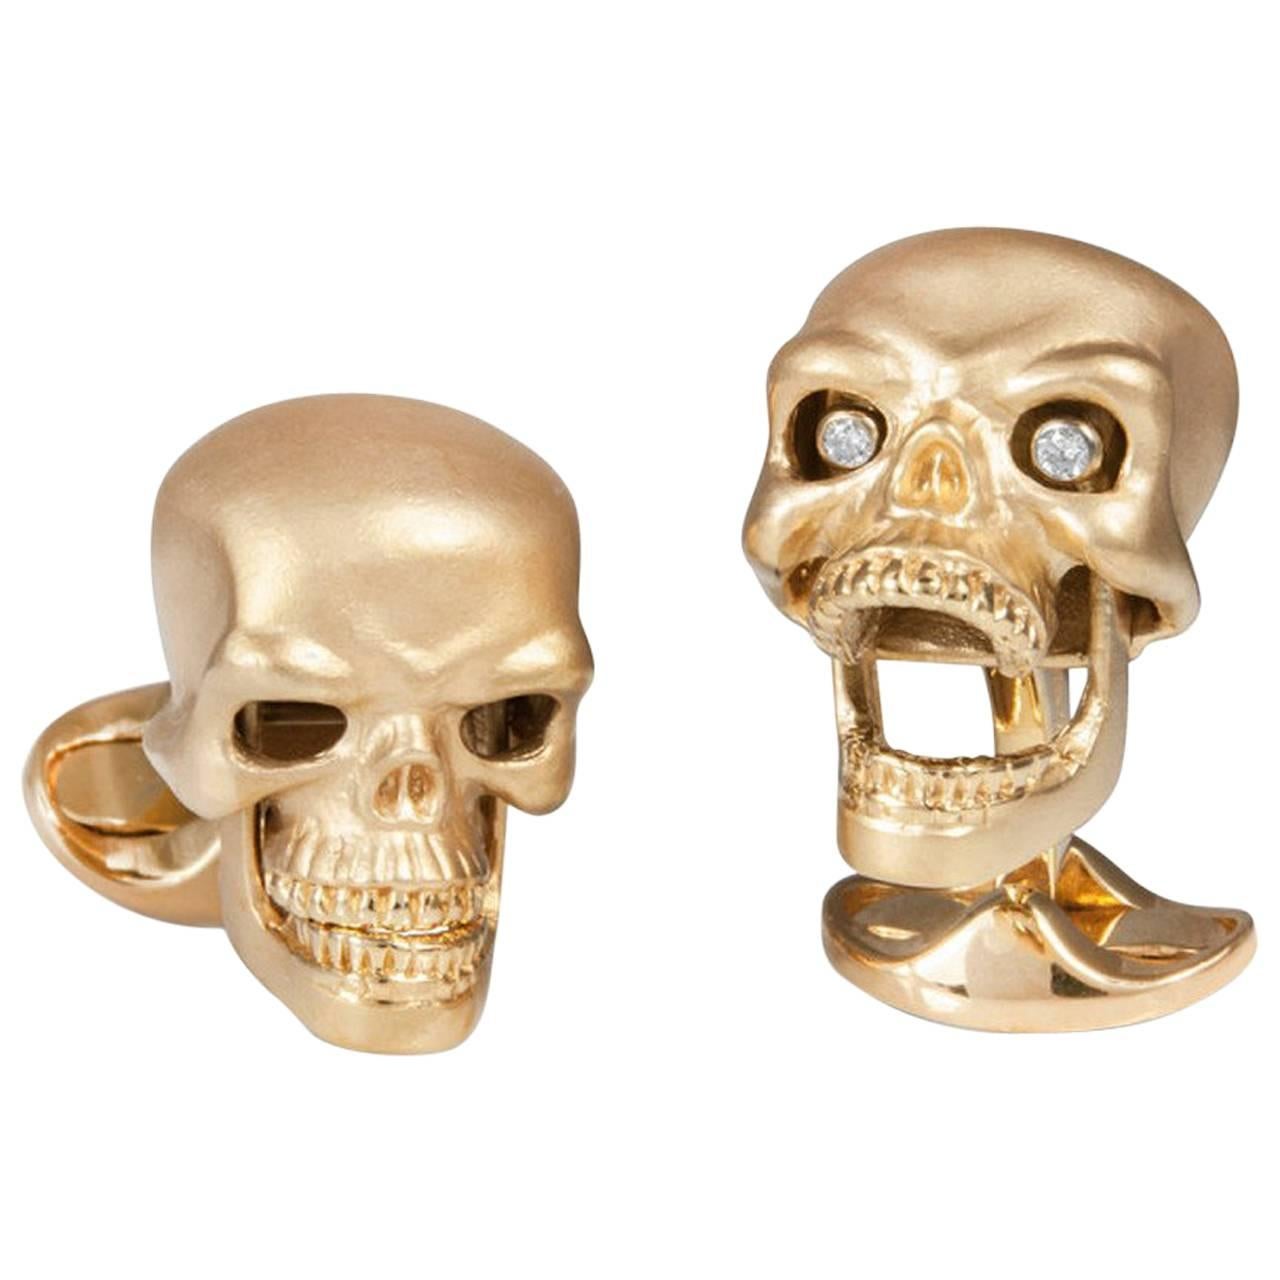 Deakin & Francis Gold Plated Sterling Silver Skull Cufflinks with Diamond Eyes